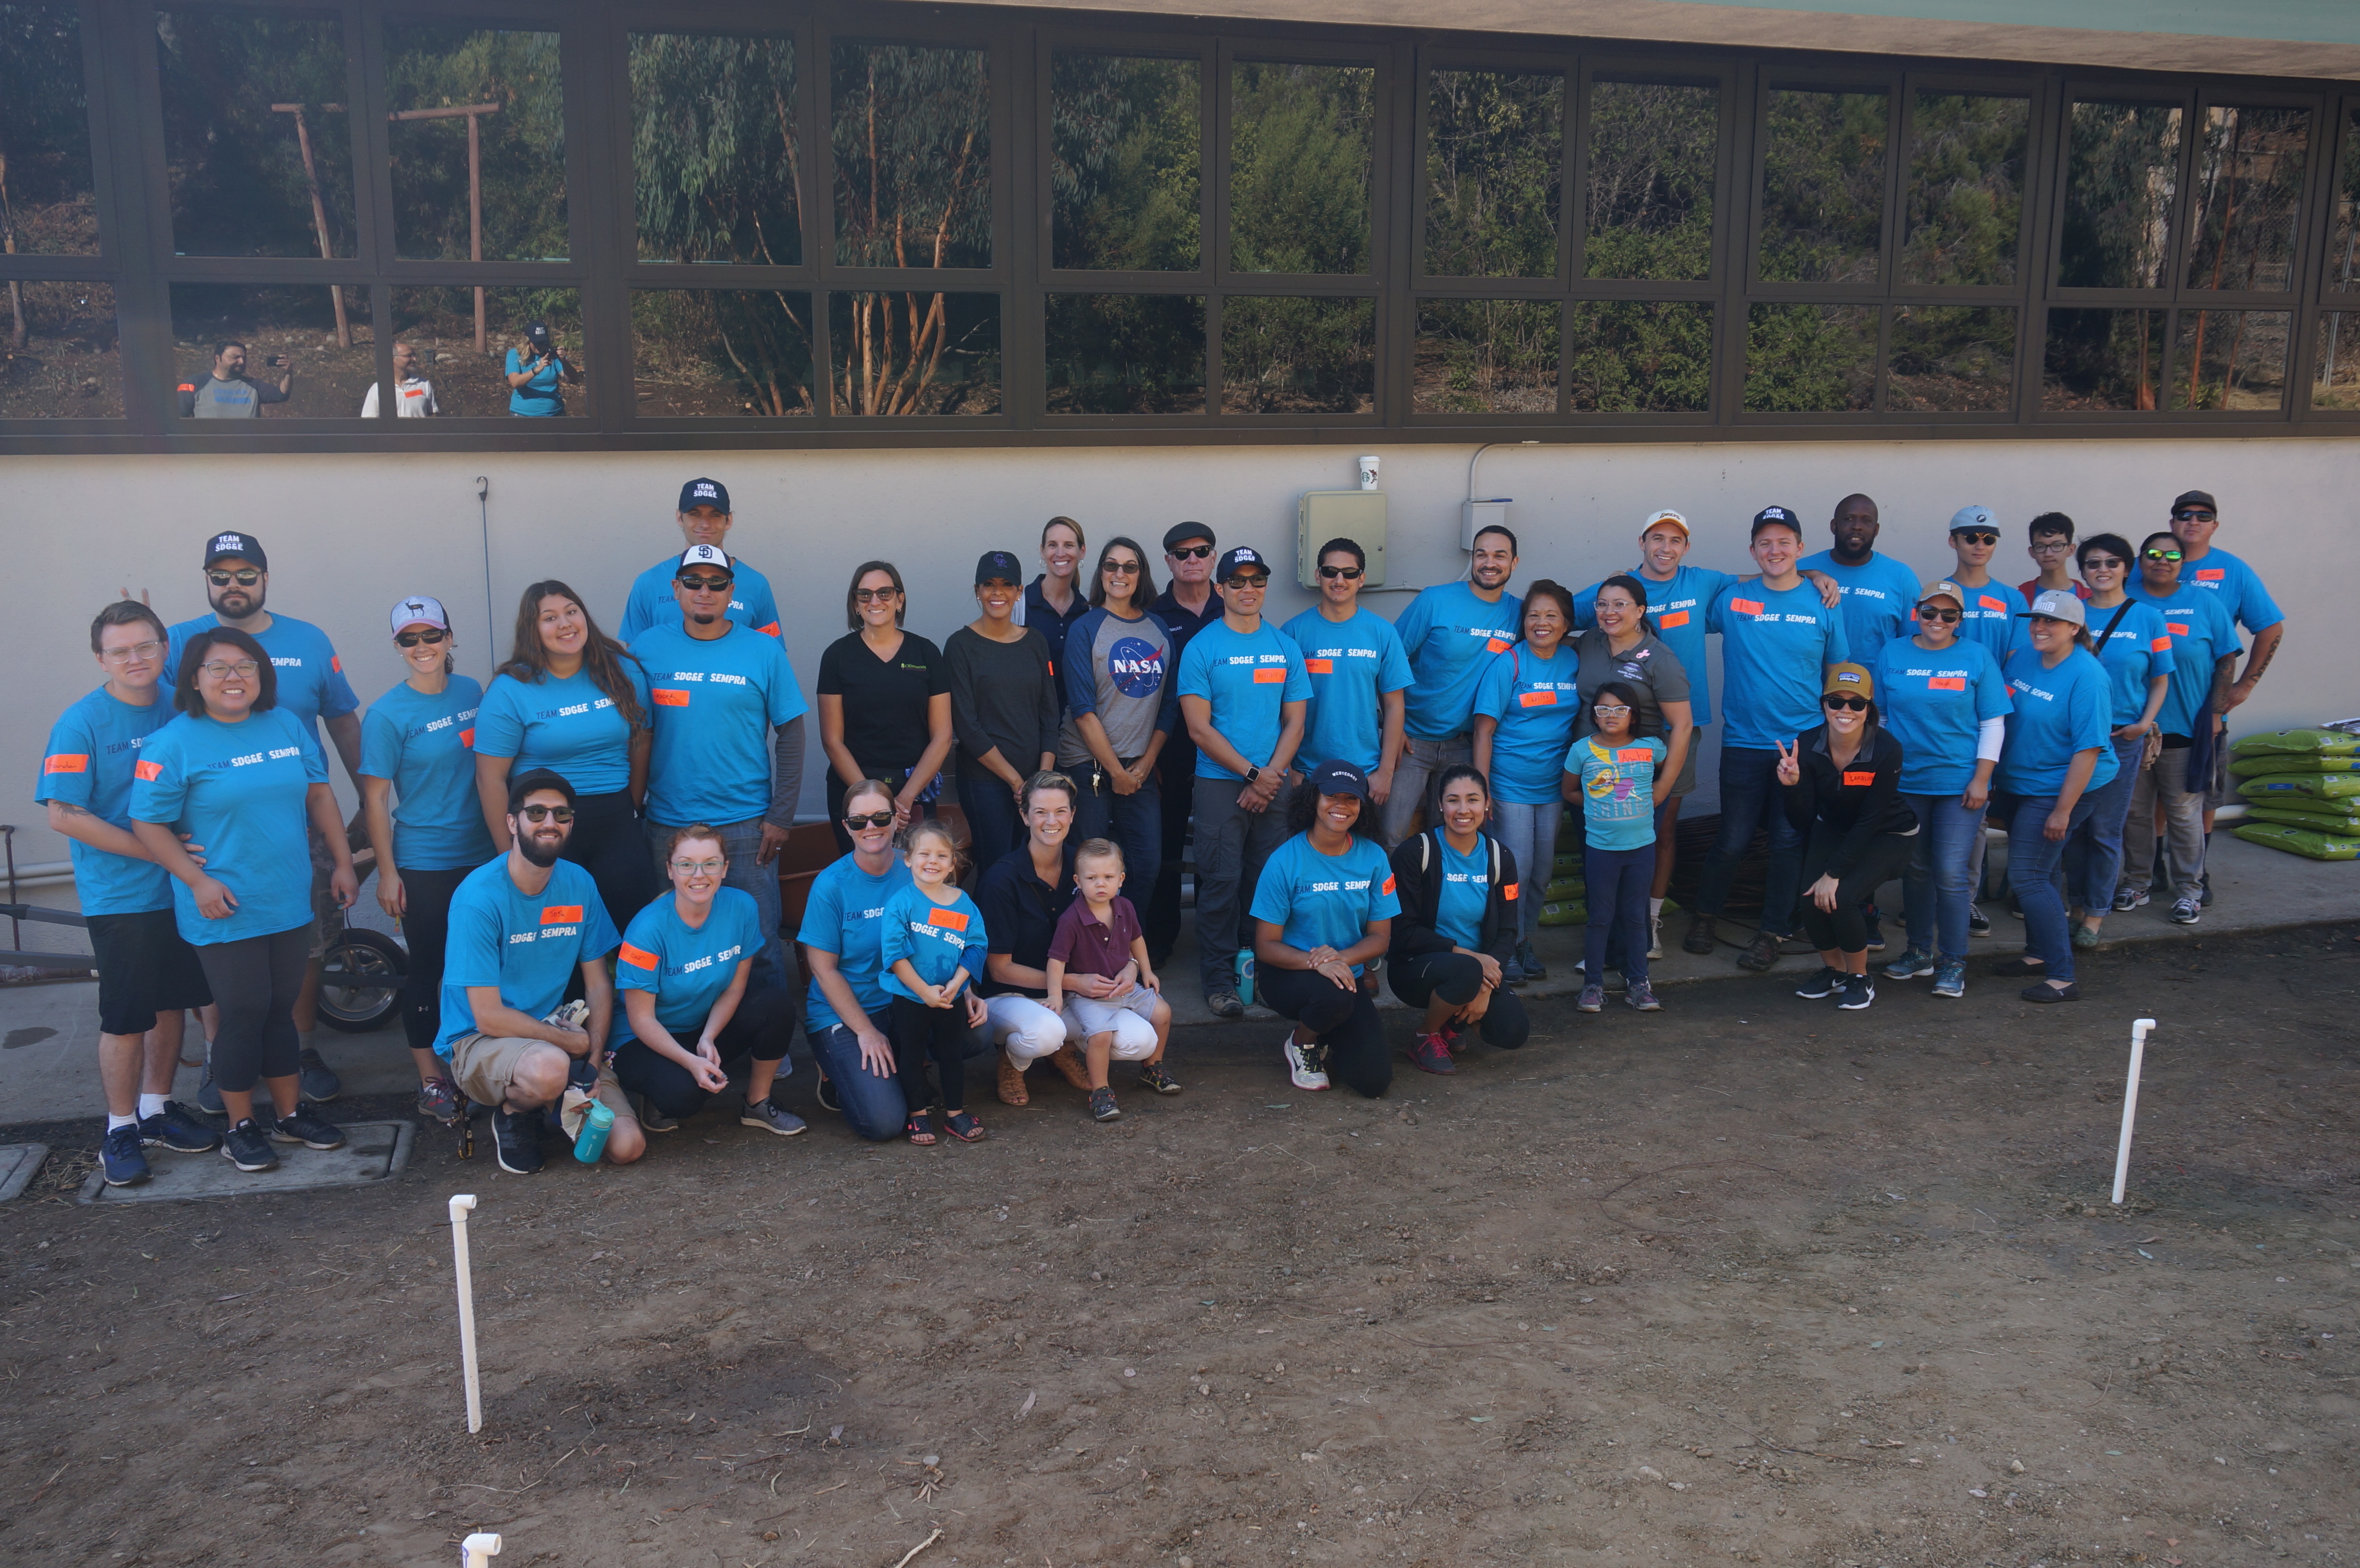 Group photo of volunteers at Ira Harbison Elementary